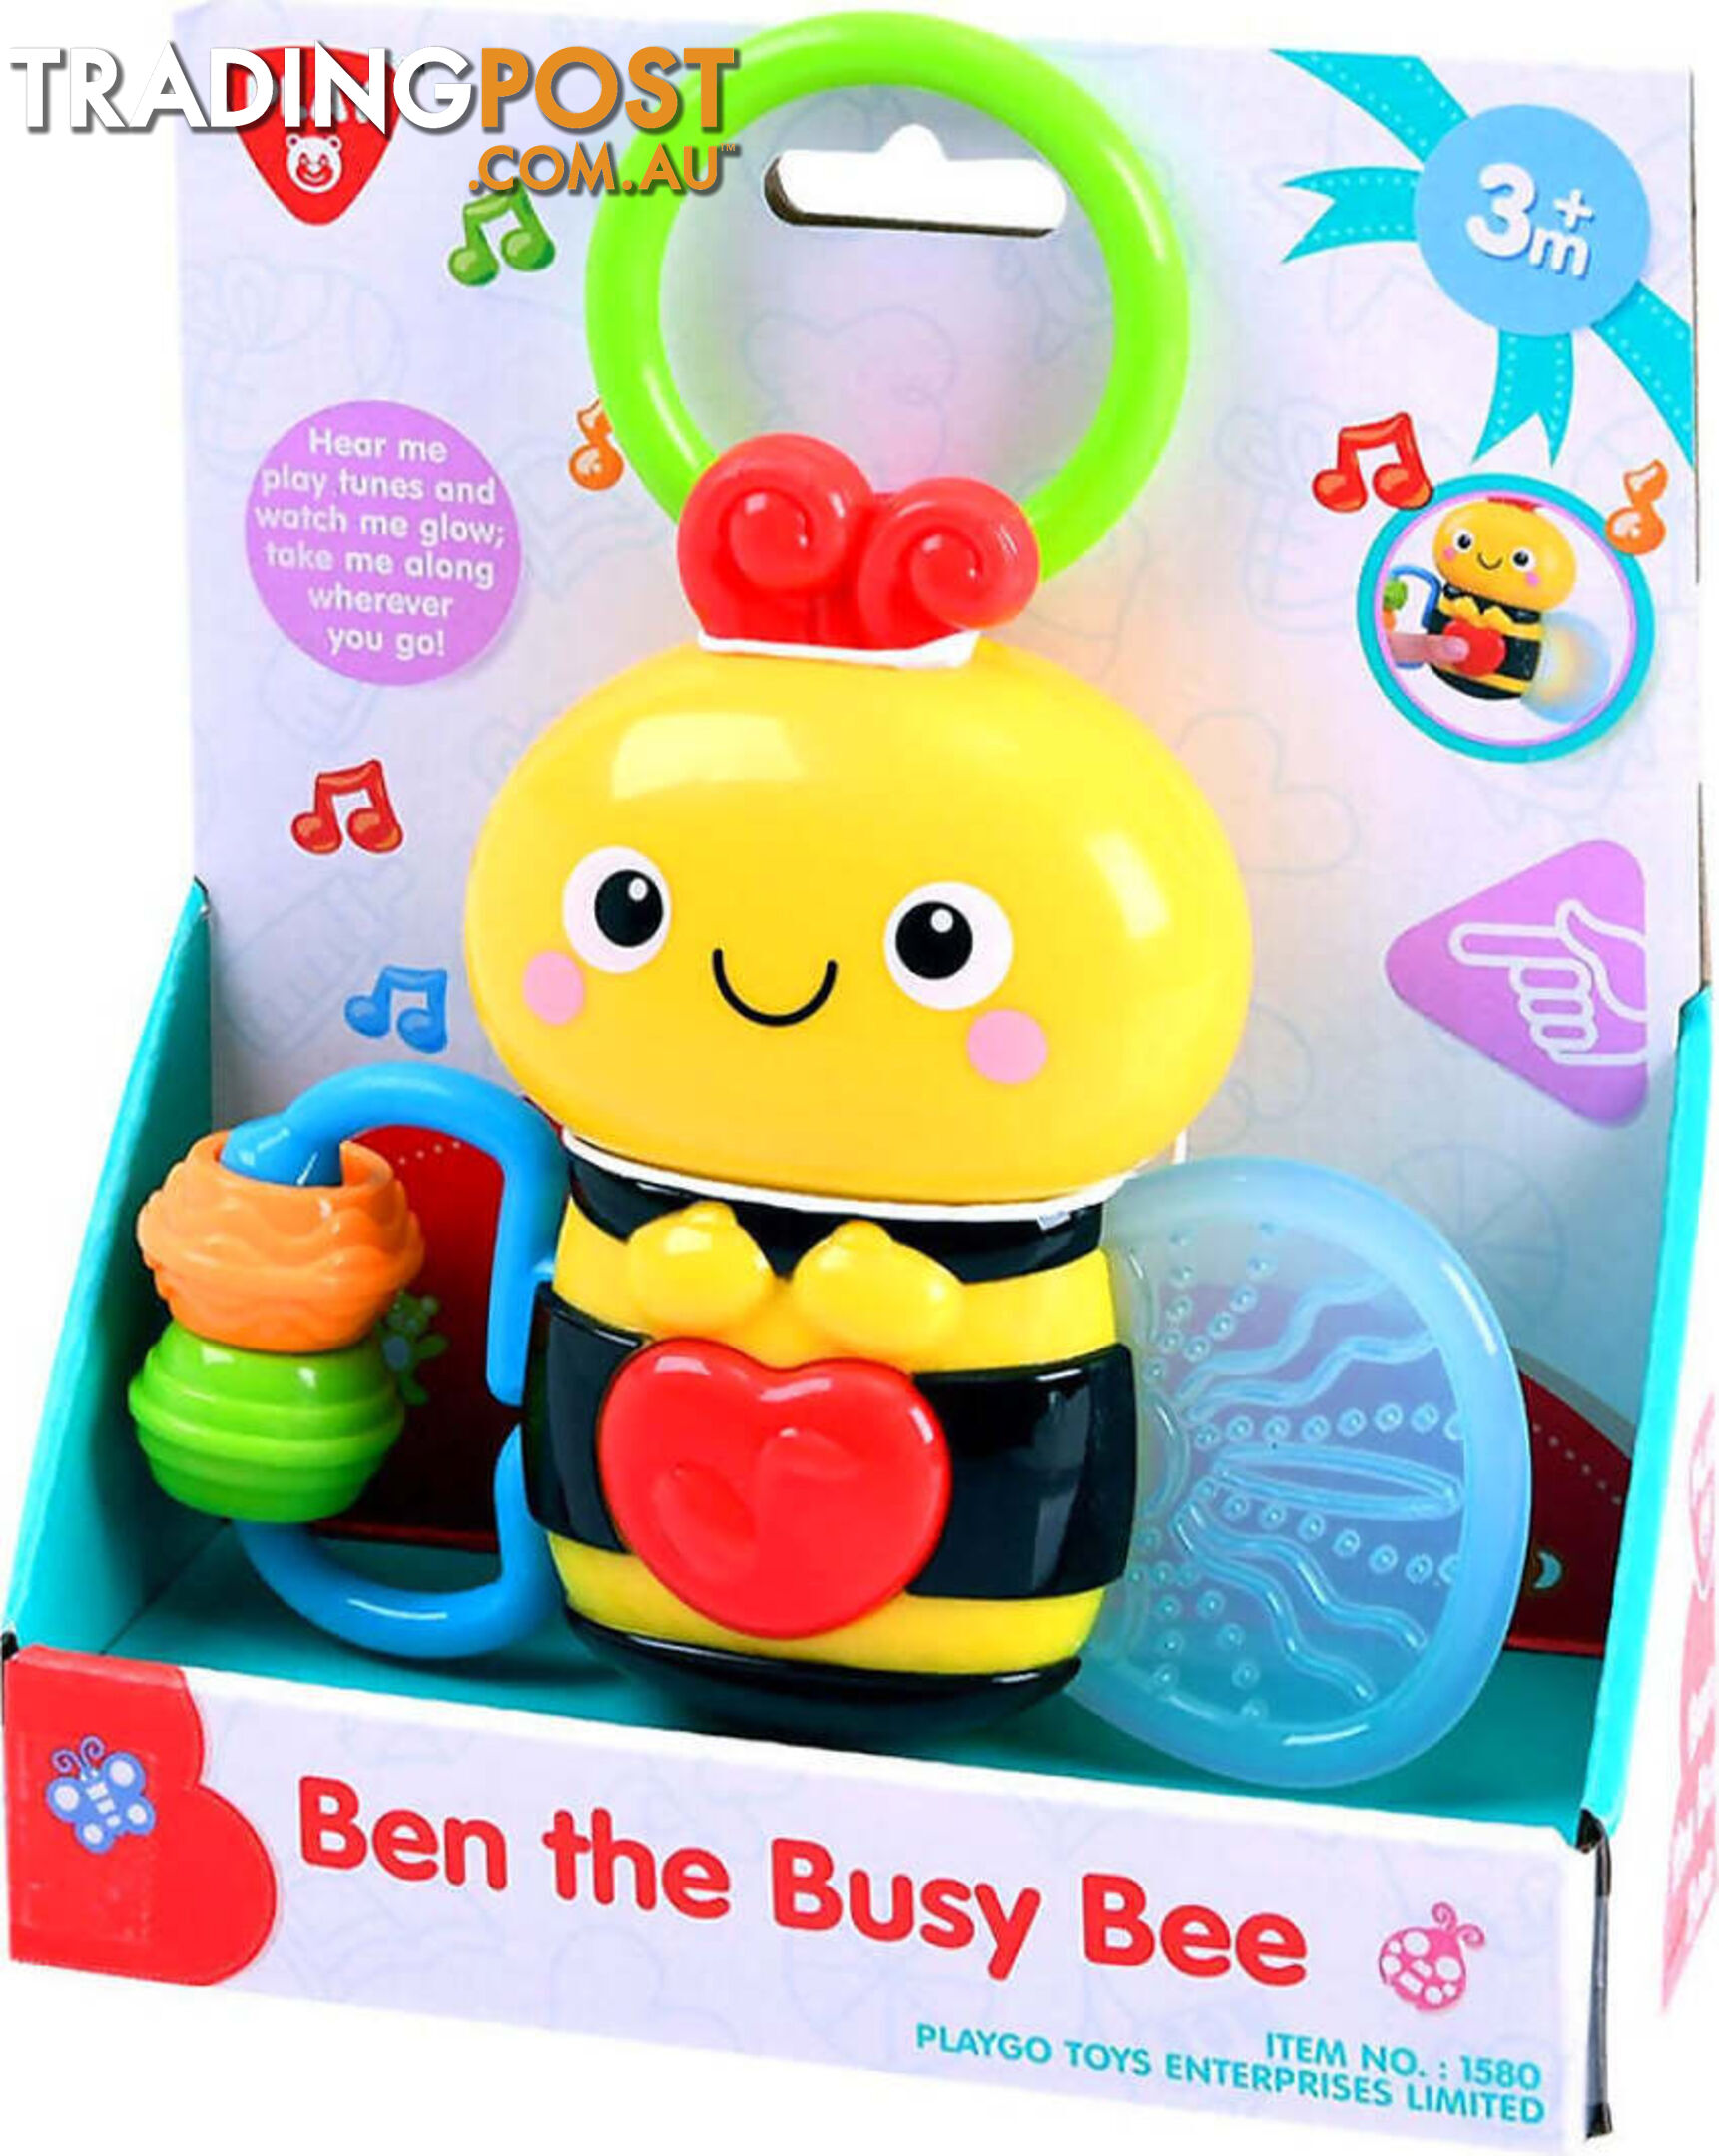 Playgo Toys Ent. Ltd. - Battery Operated Ben The Busy Bee - Art65476 - 4892401015808